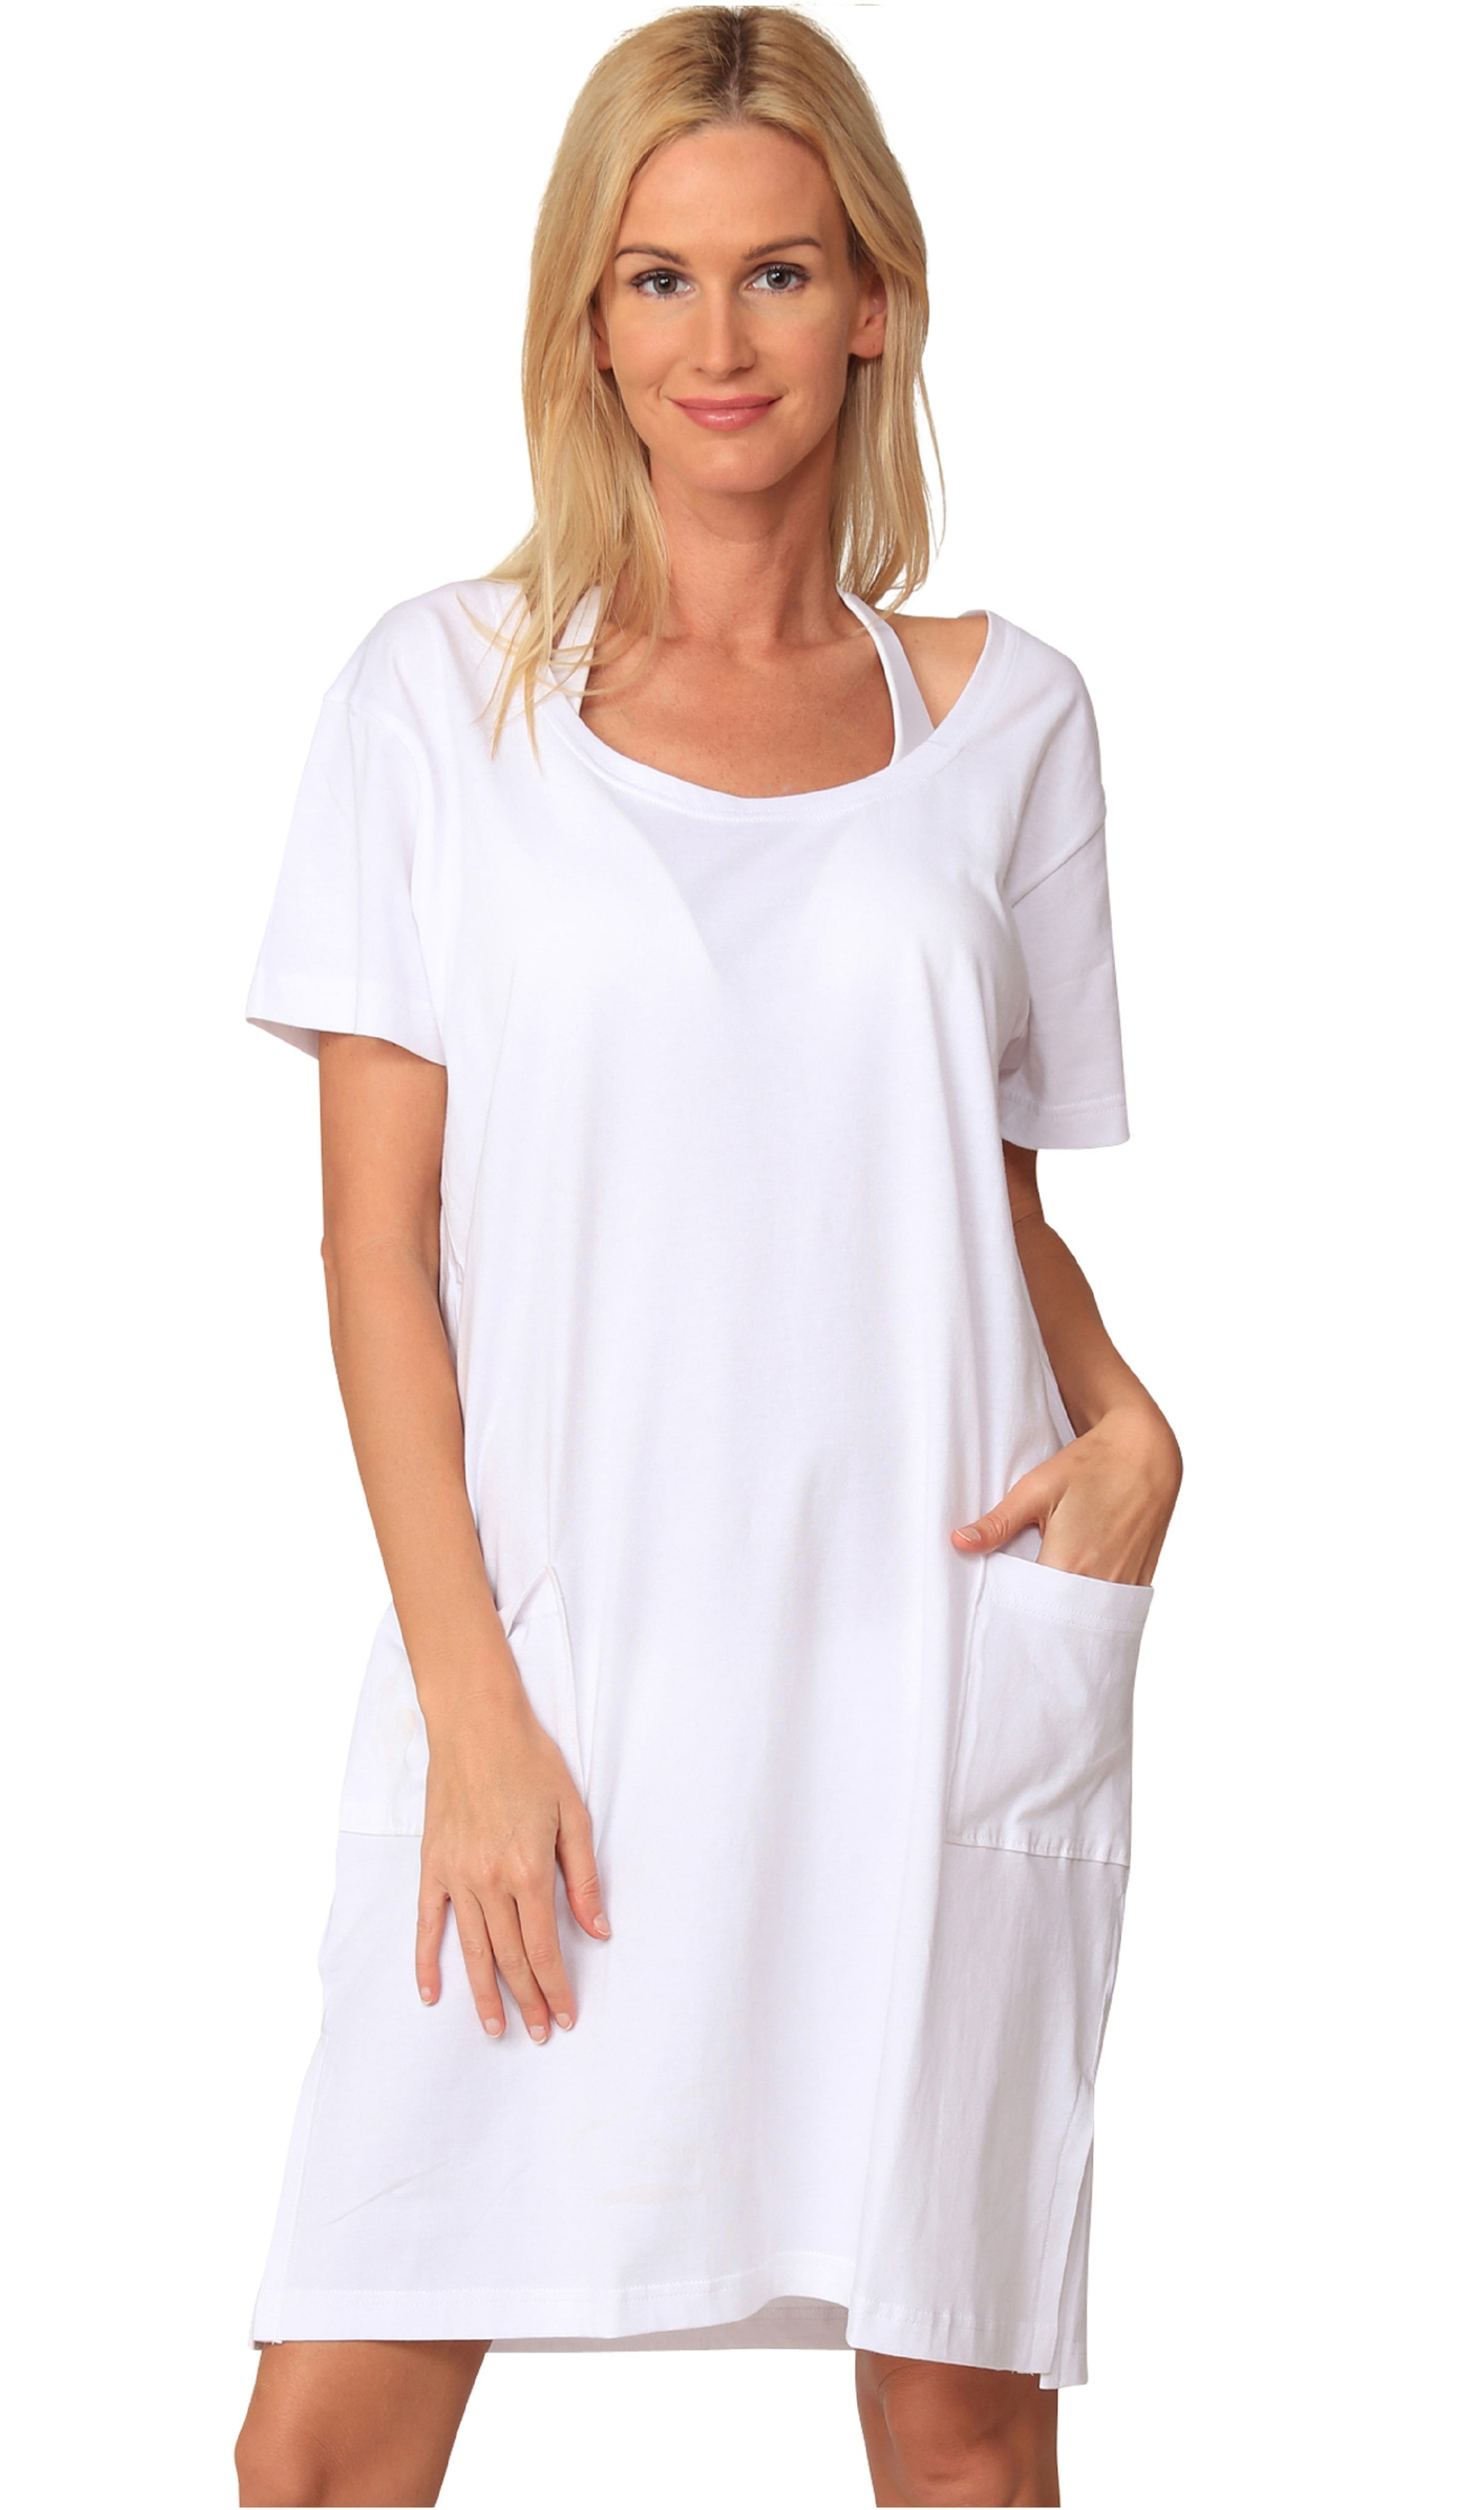 Ingear Cotton Dress Beach Casual Sleeve Summer Fashion Cover Up ...